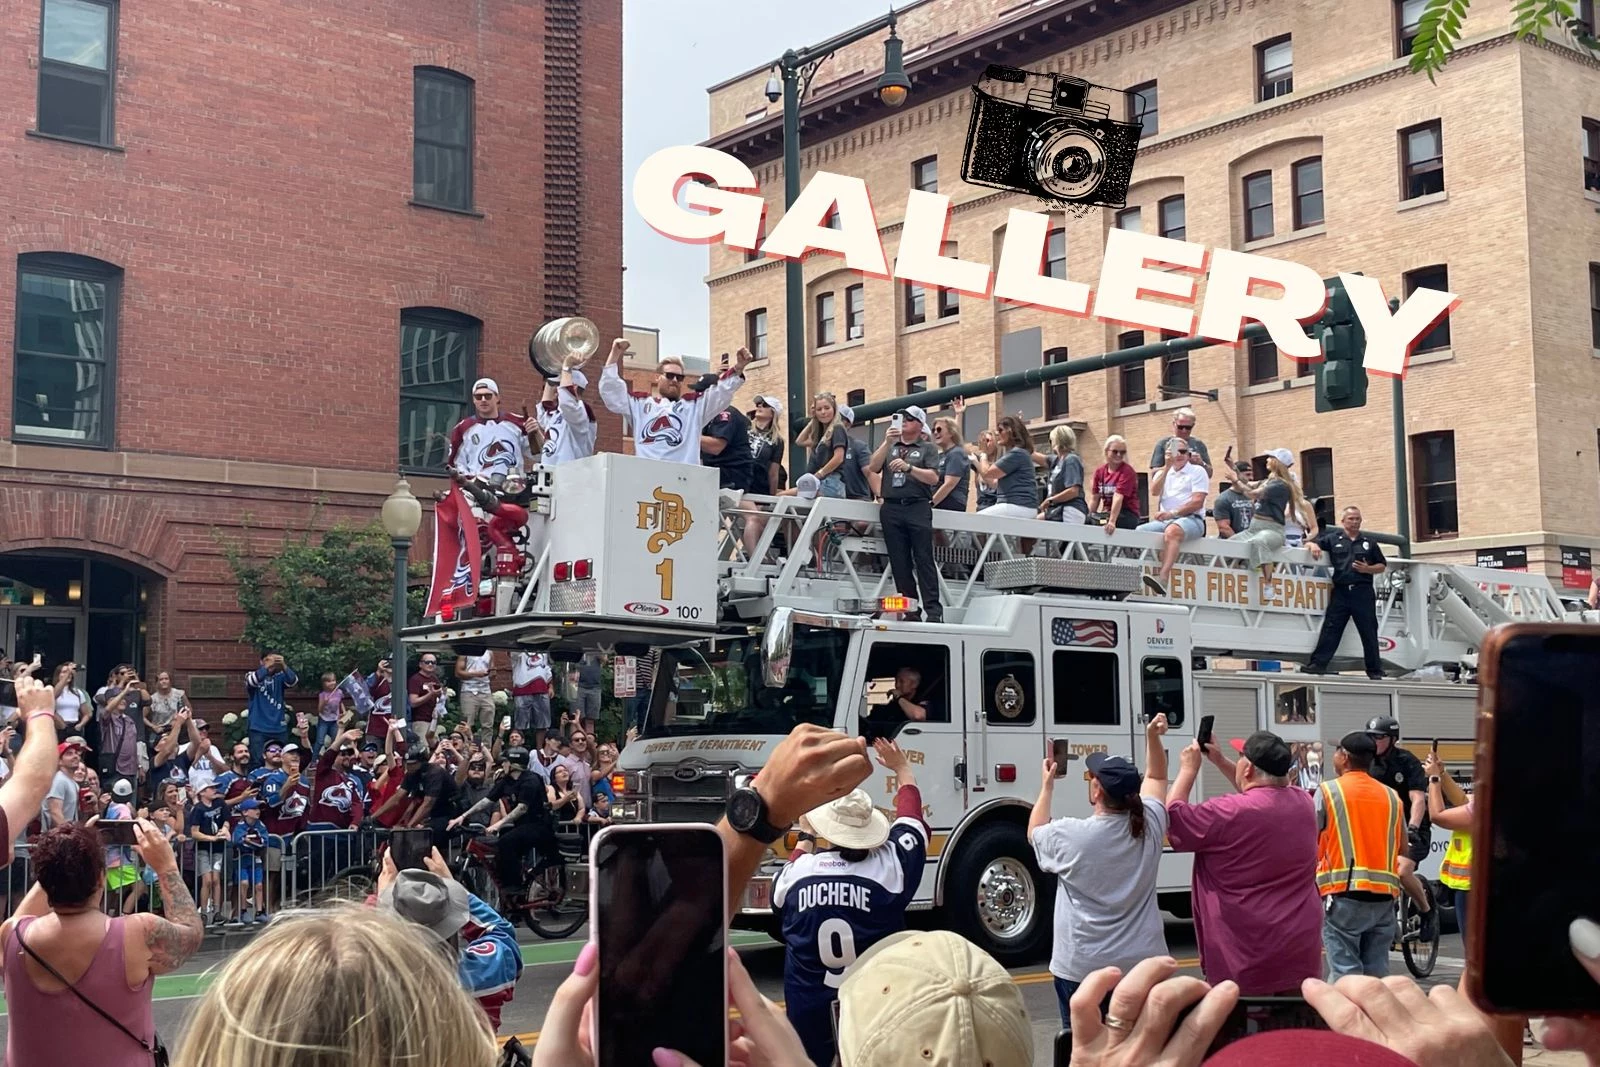 Colorado Avalanches Joe Sakic waves to the cheering crowd in a